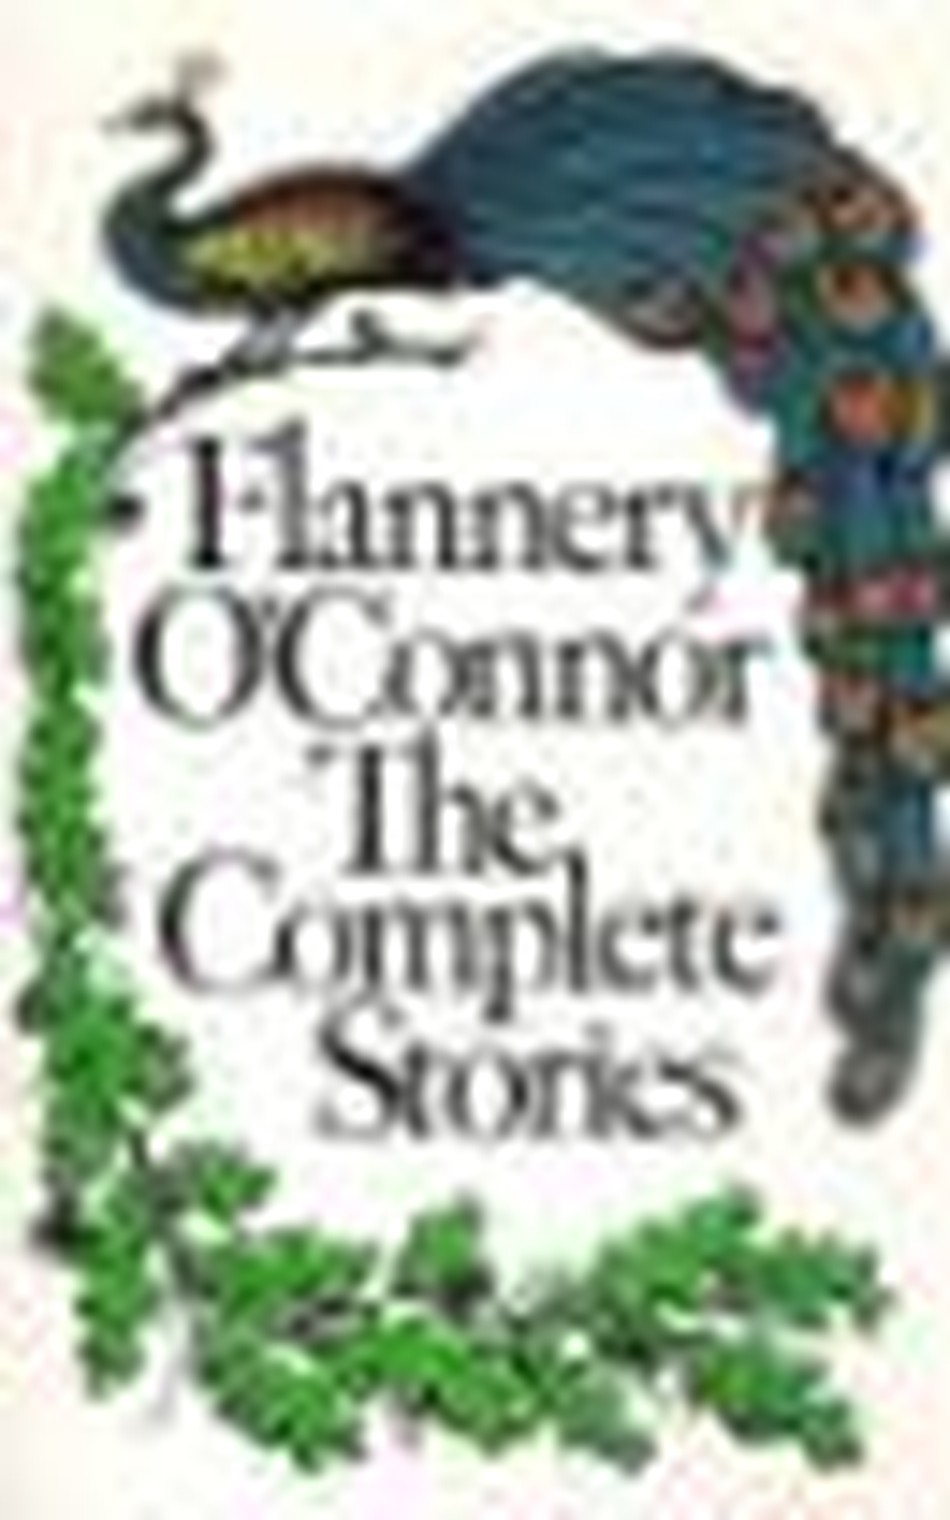 O'Connor's Latest Award: An Implicit Plea to Christian Writers - Part 2